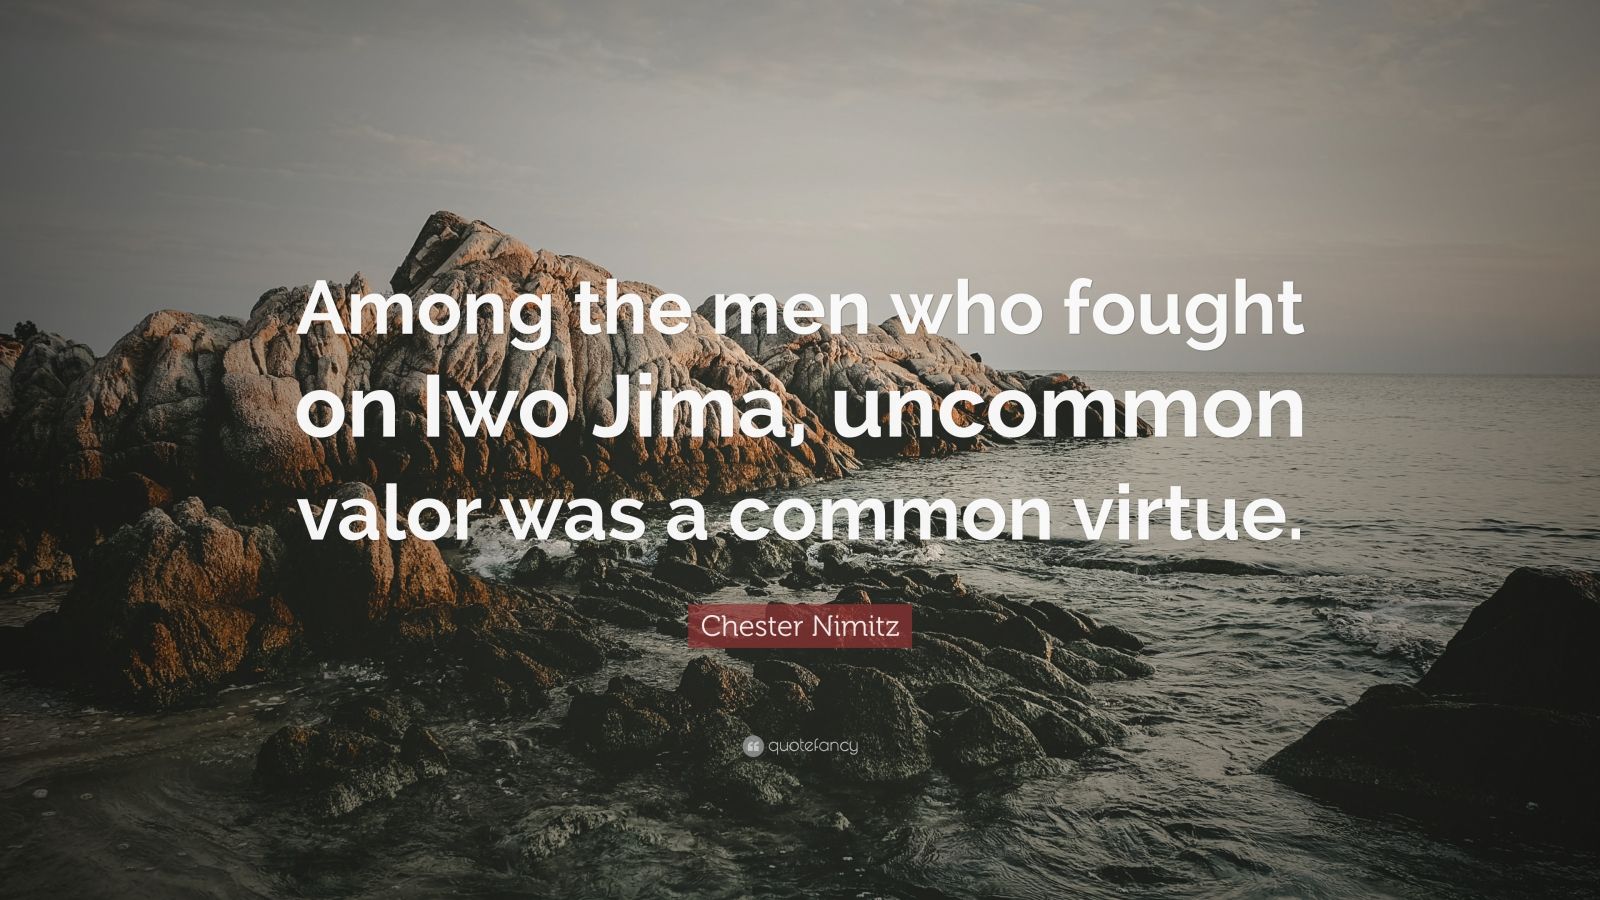 Chester Nimitz Quote: "Among the men who fought on Iwo Jima, uncommon valor was a common virtue ...